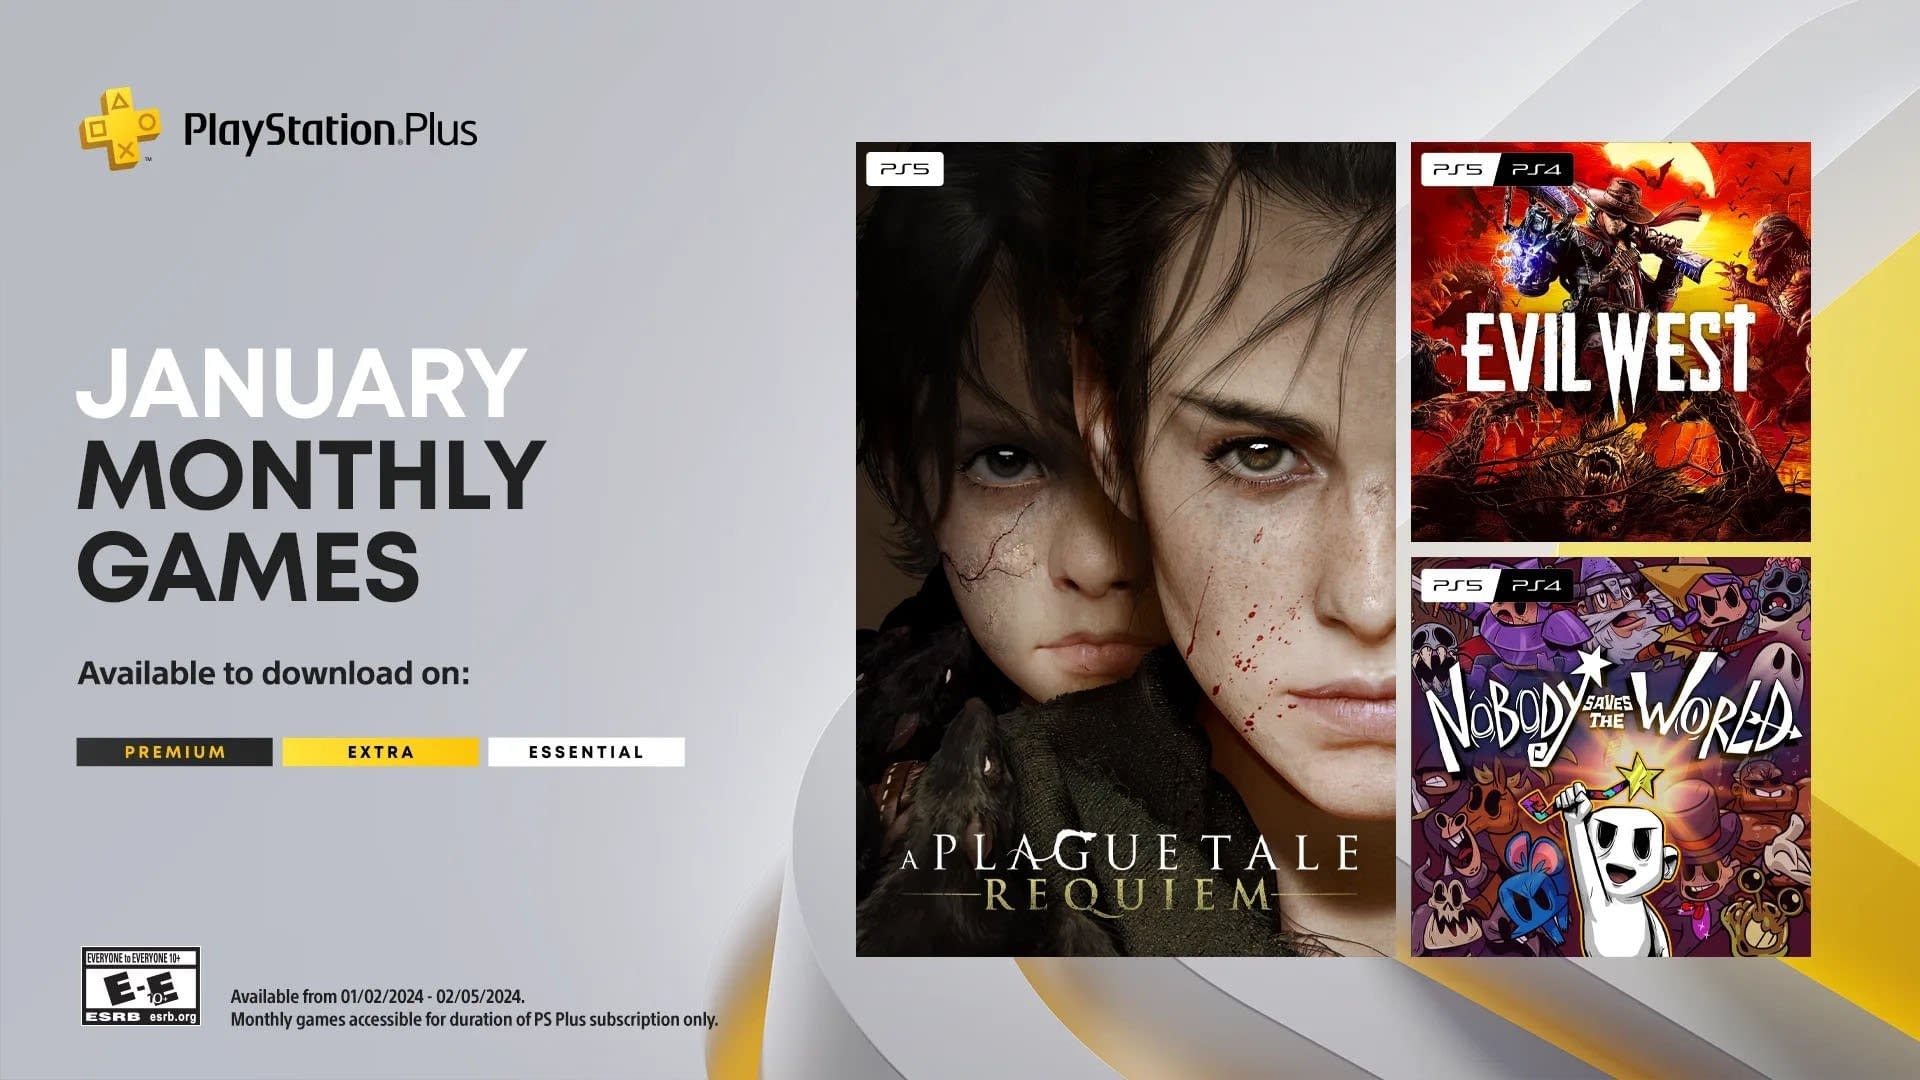 Playstation Plus January Games Announced: 3200 TL Value!